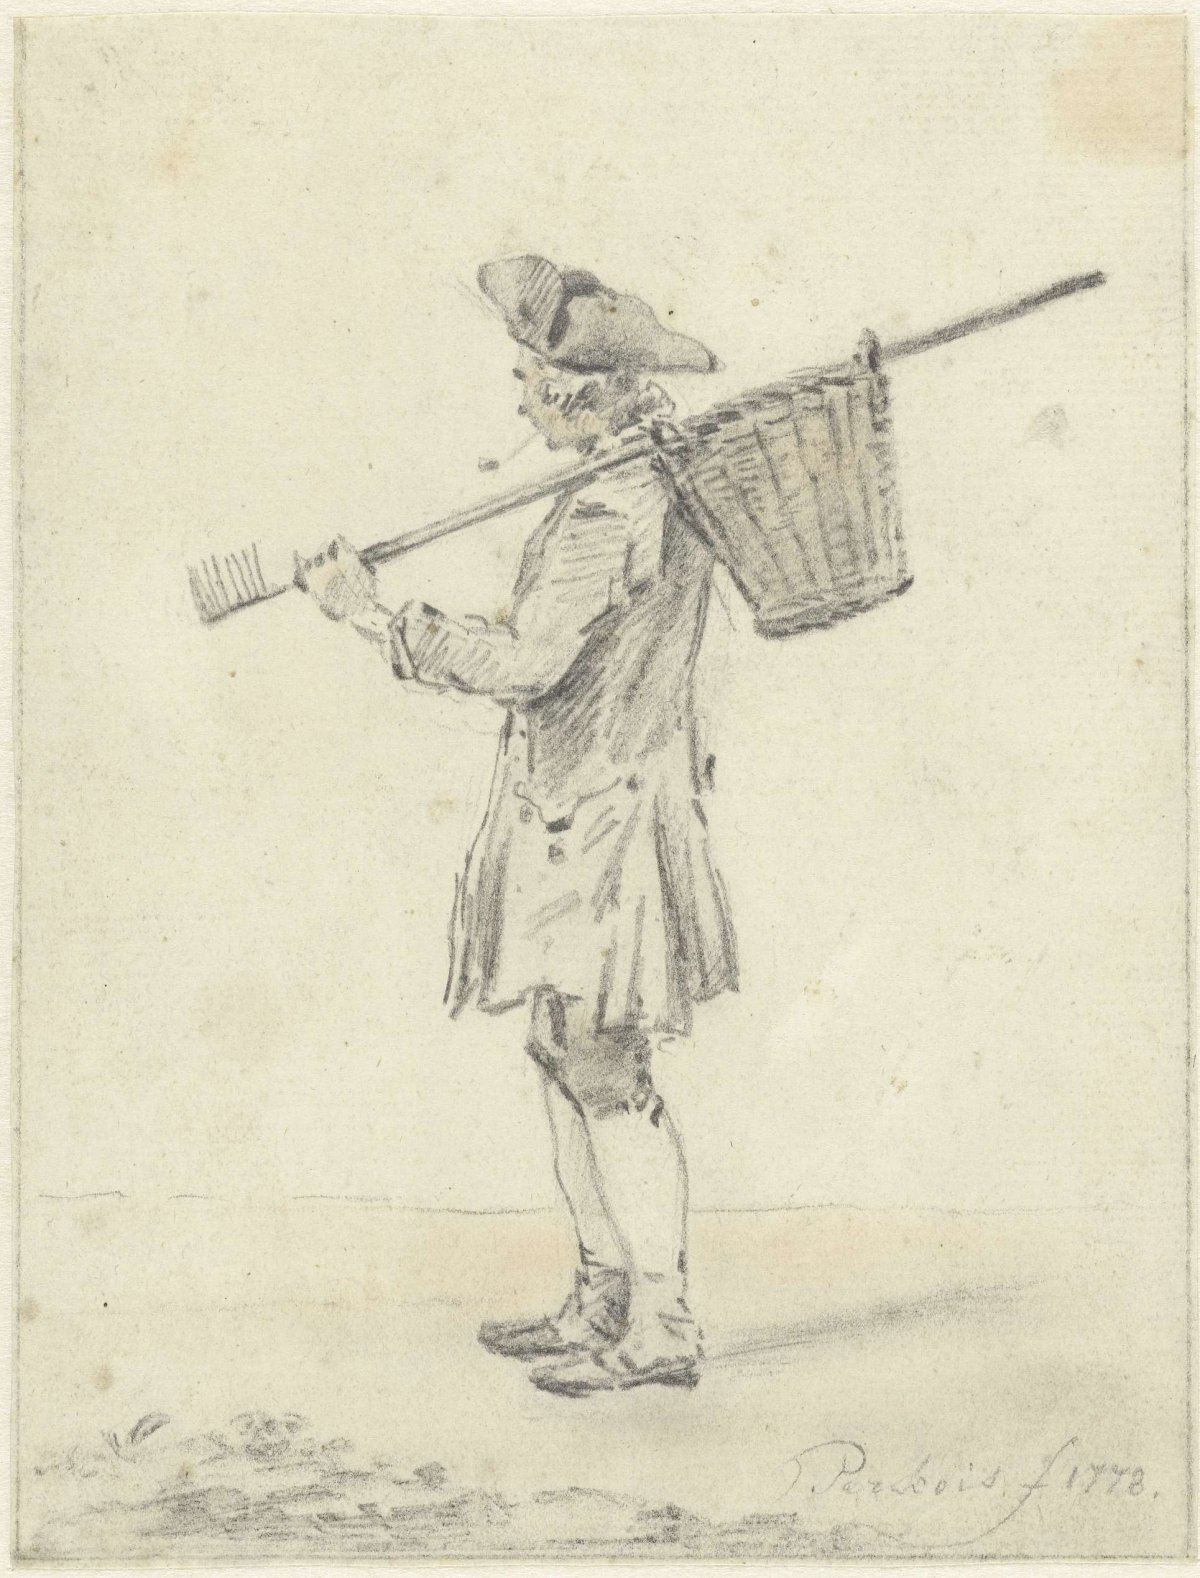 Standing man with a rake over his shoulder, Jacob Perkois, 1777 - 1778